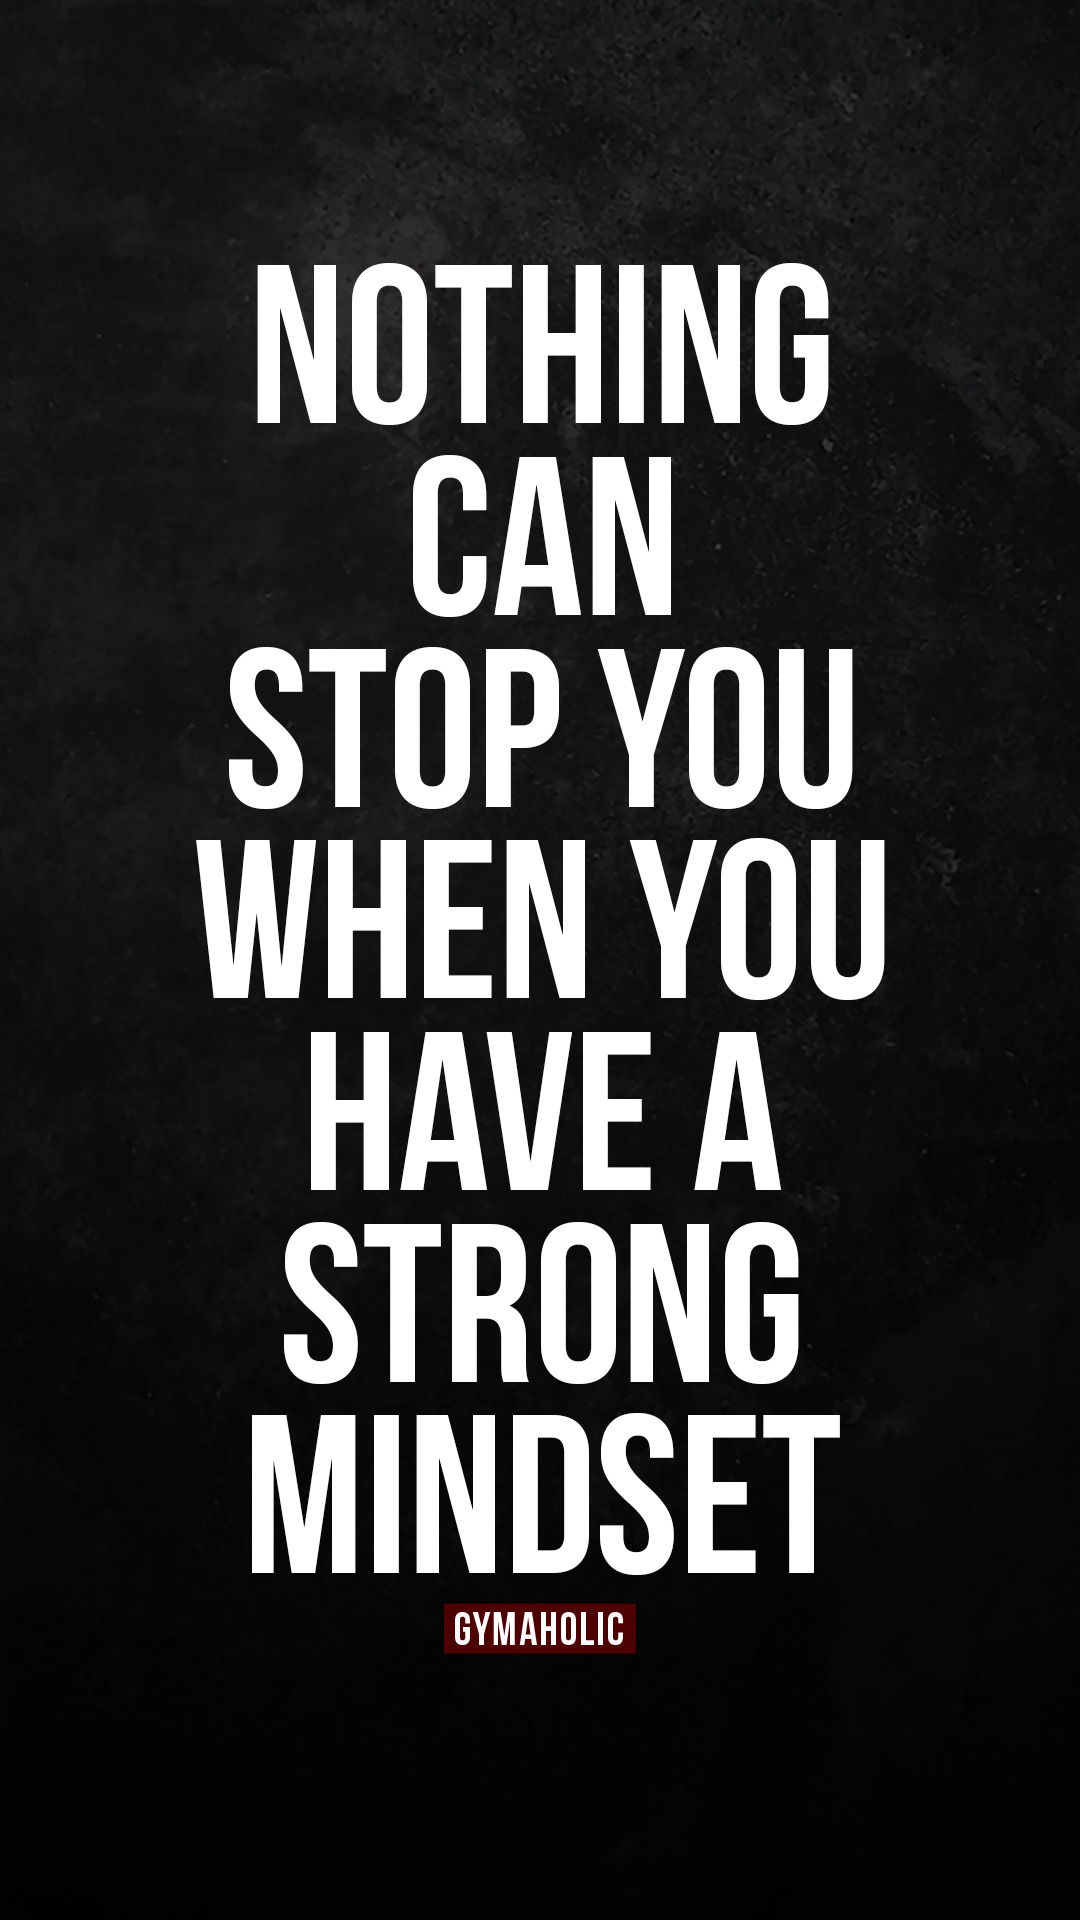 Nothing can stop you when you have a strong mindset